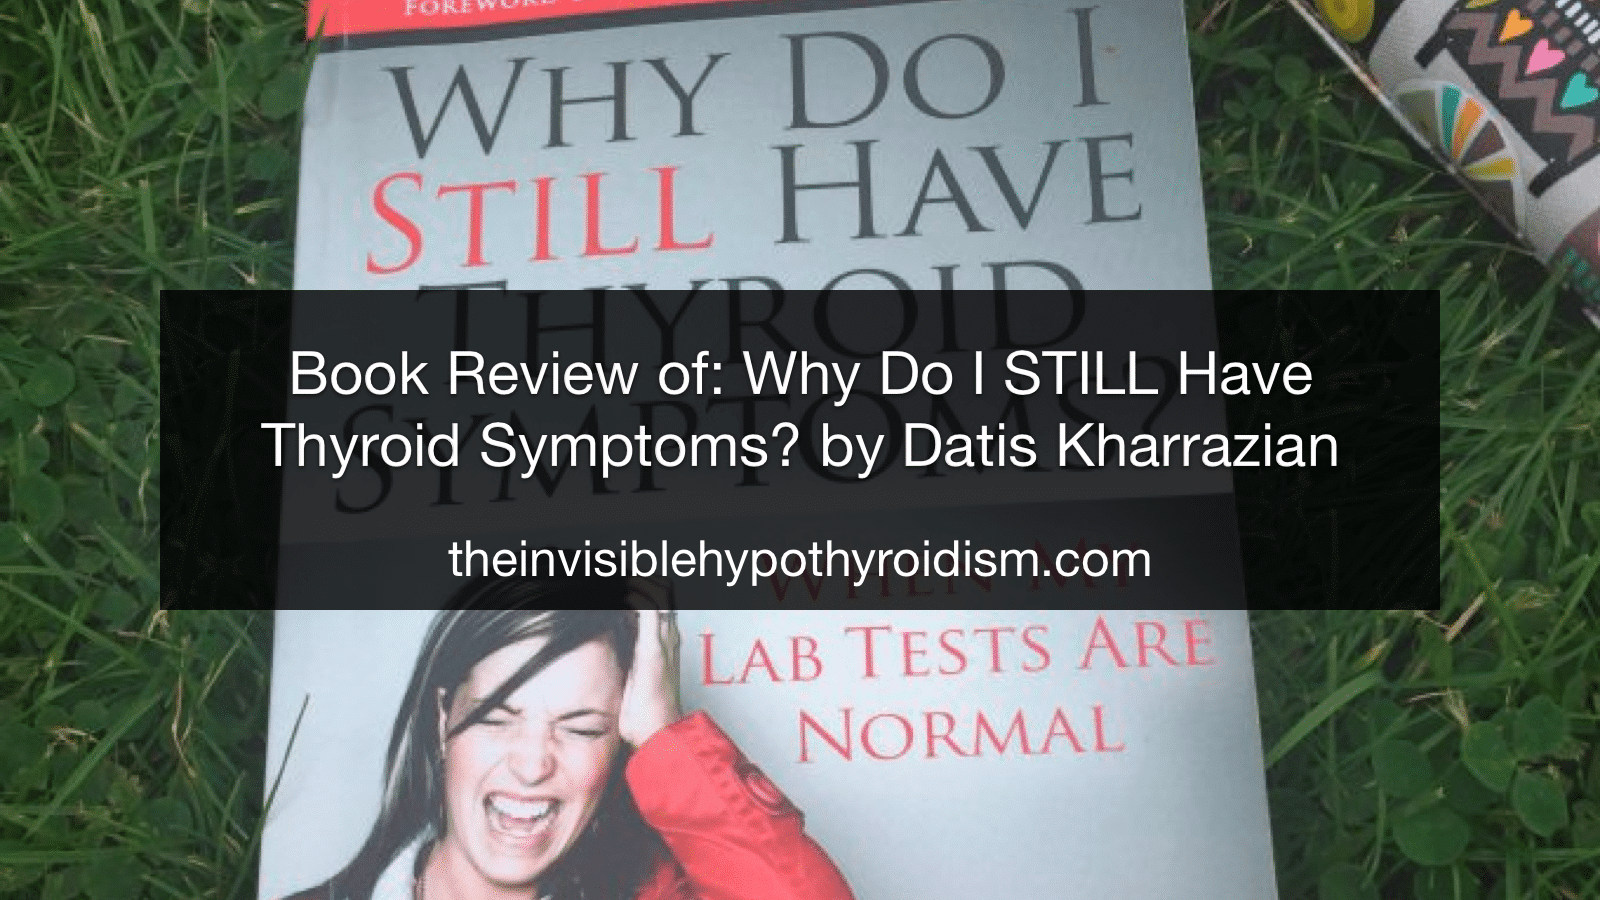 Book Review of: Why Do I STILL Have Thyroid Symptoms? When My Lab Tests Are Normal.. by Datis Kharrazian, DHSc, DC, MS